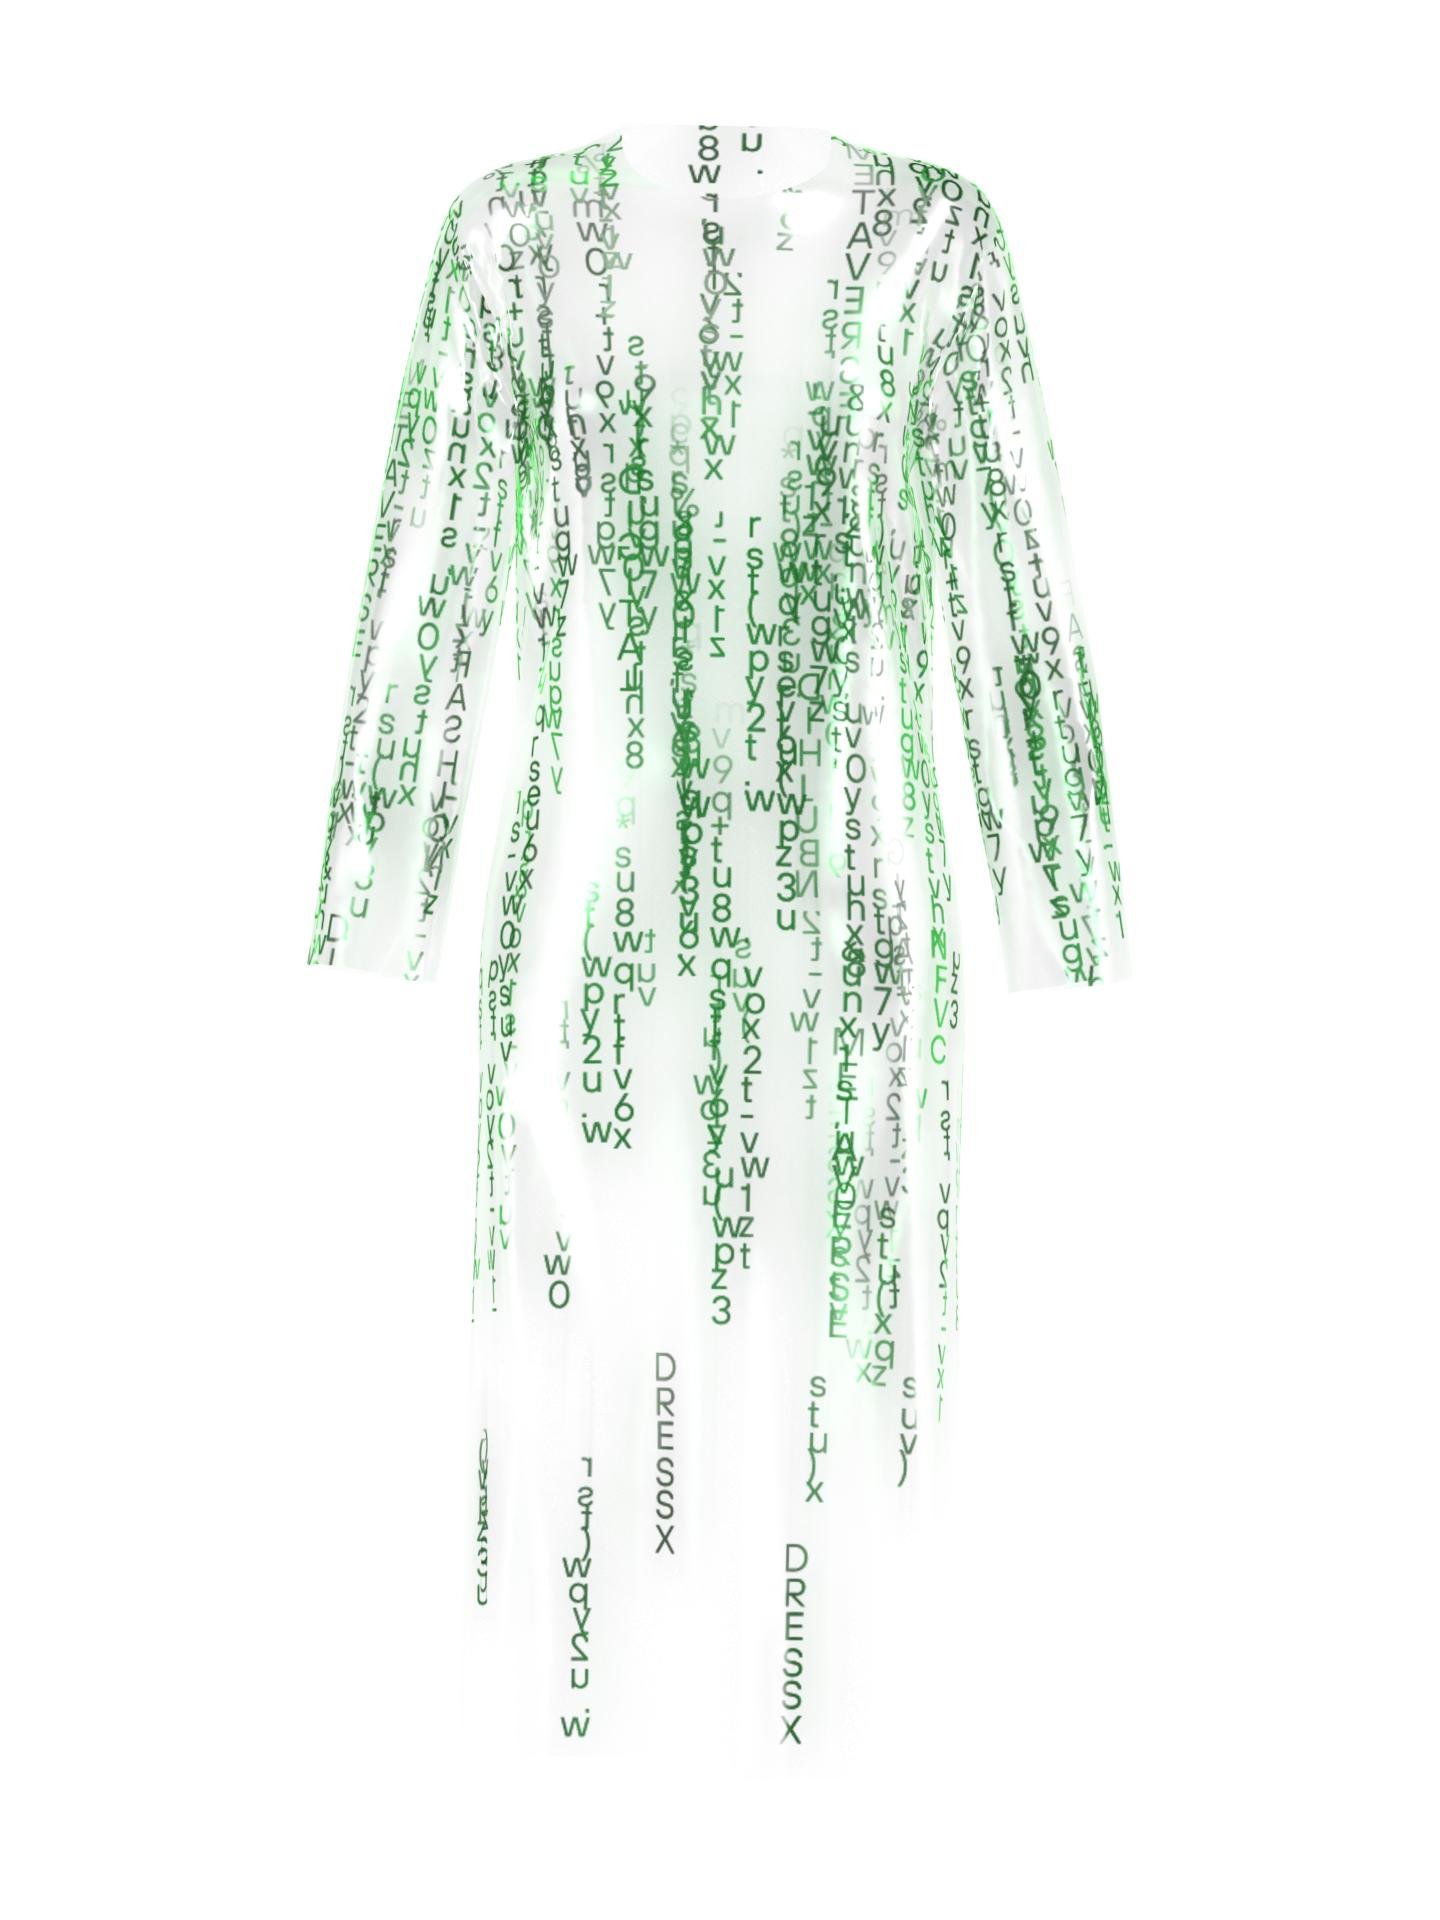 Corrupted file dress by DRESSX